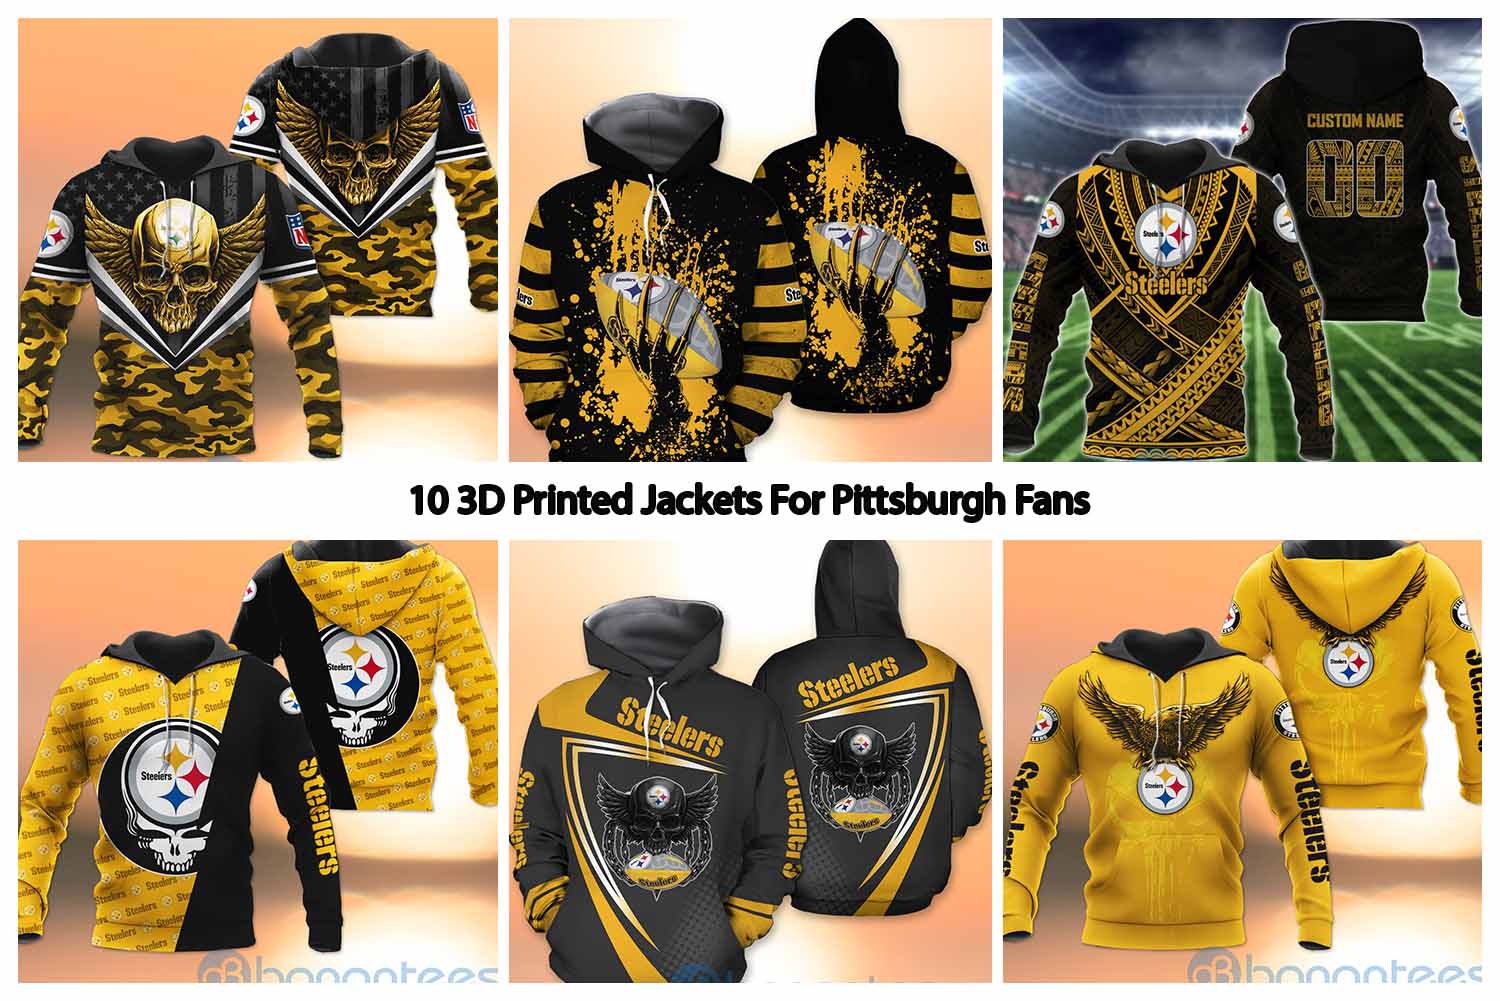 10 3D Printed Jackets For Pittsburgh Fans